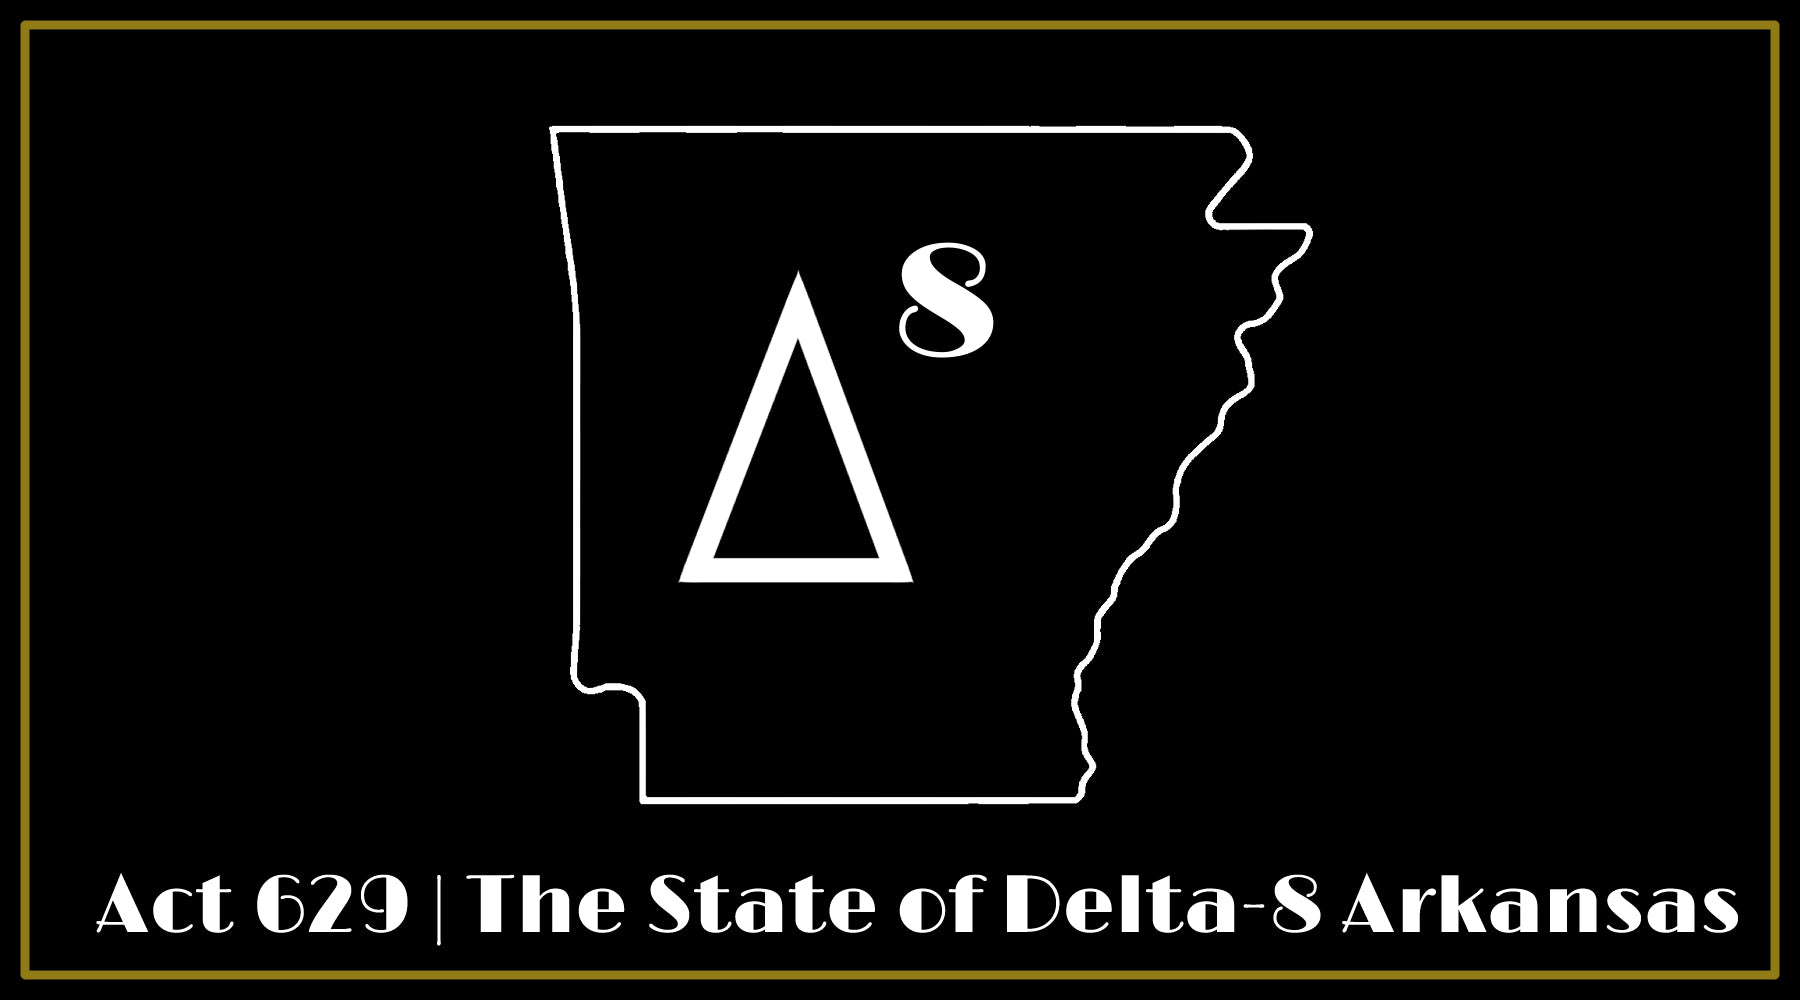 Act 629:The State of Delta-9 Arkansas